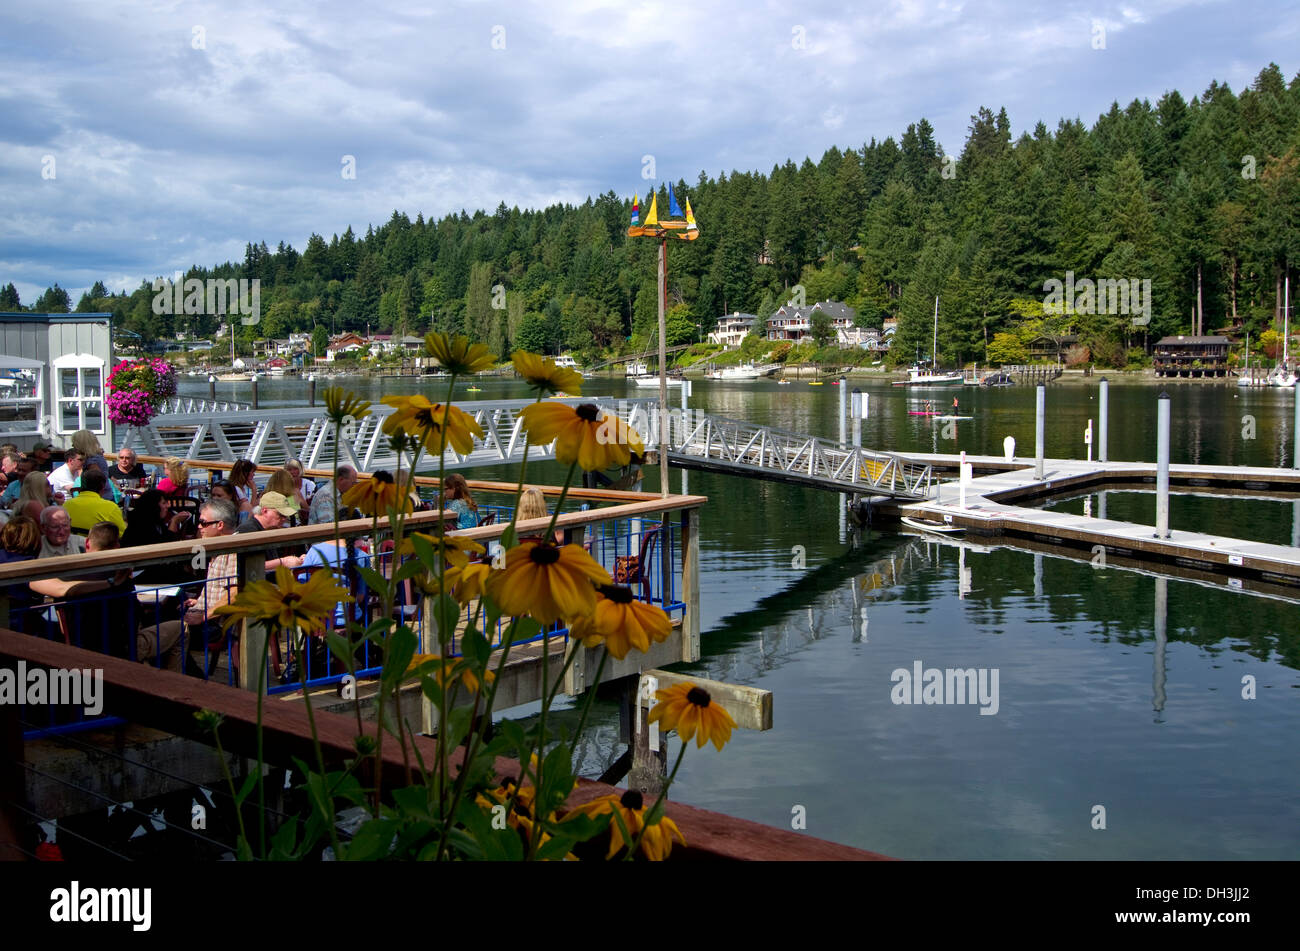 Water activities in front of the Tides Tavern Gig Harbor Washington Stock Photo